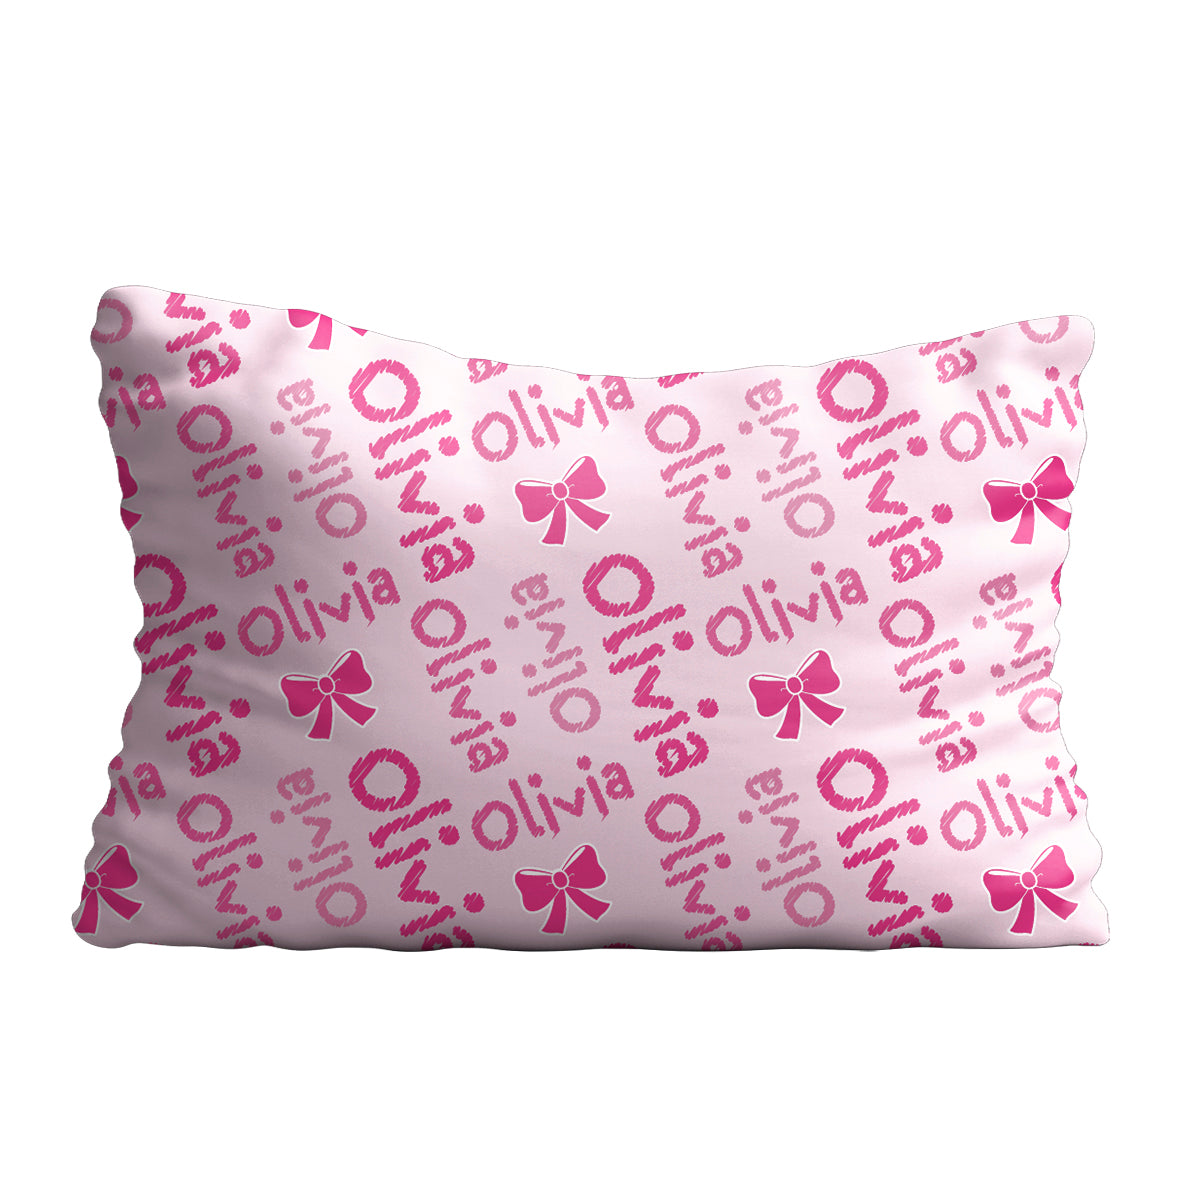 Bows and name print pink pillow case - Wimziy&Co.